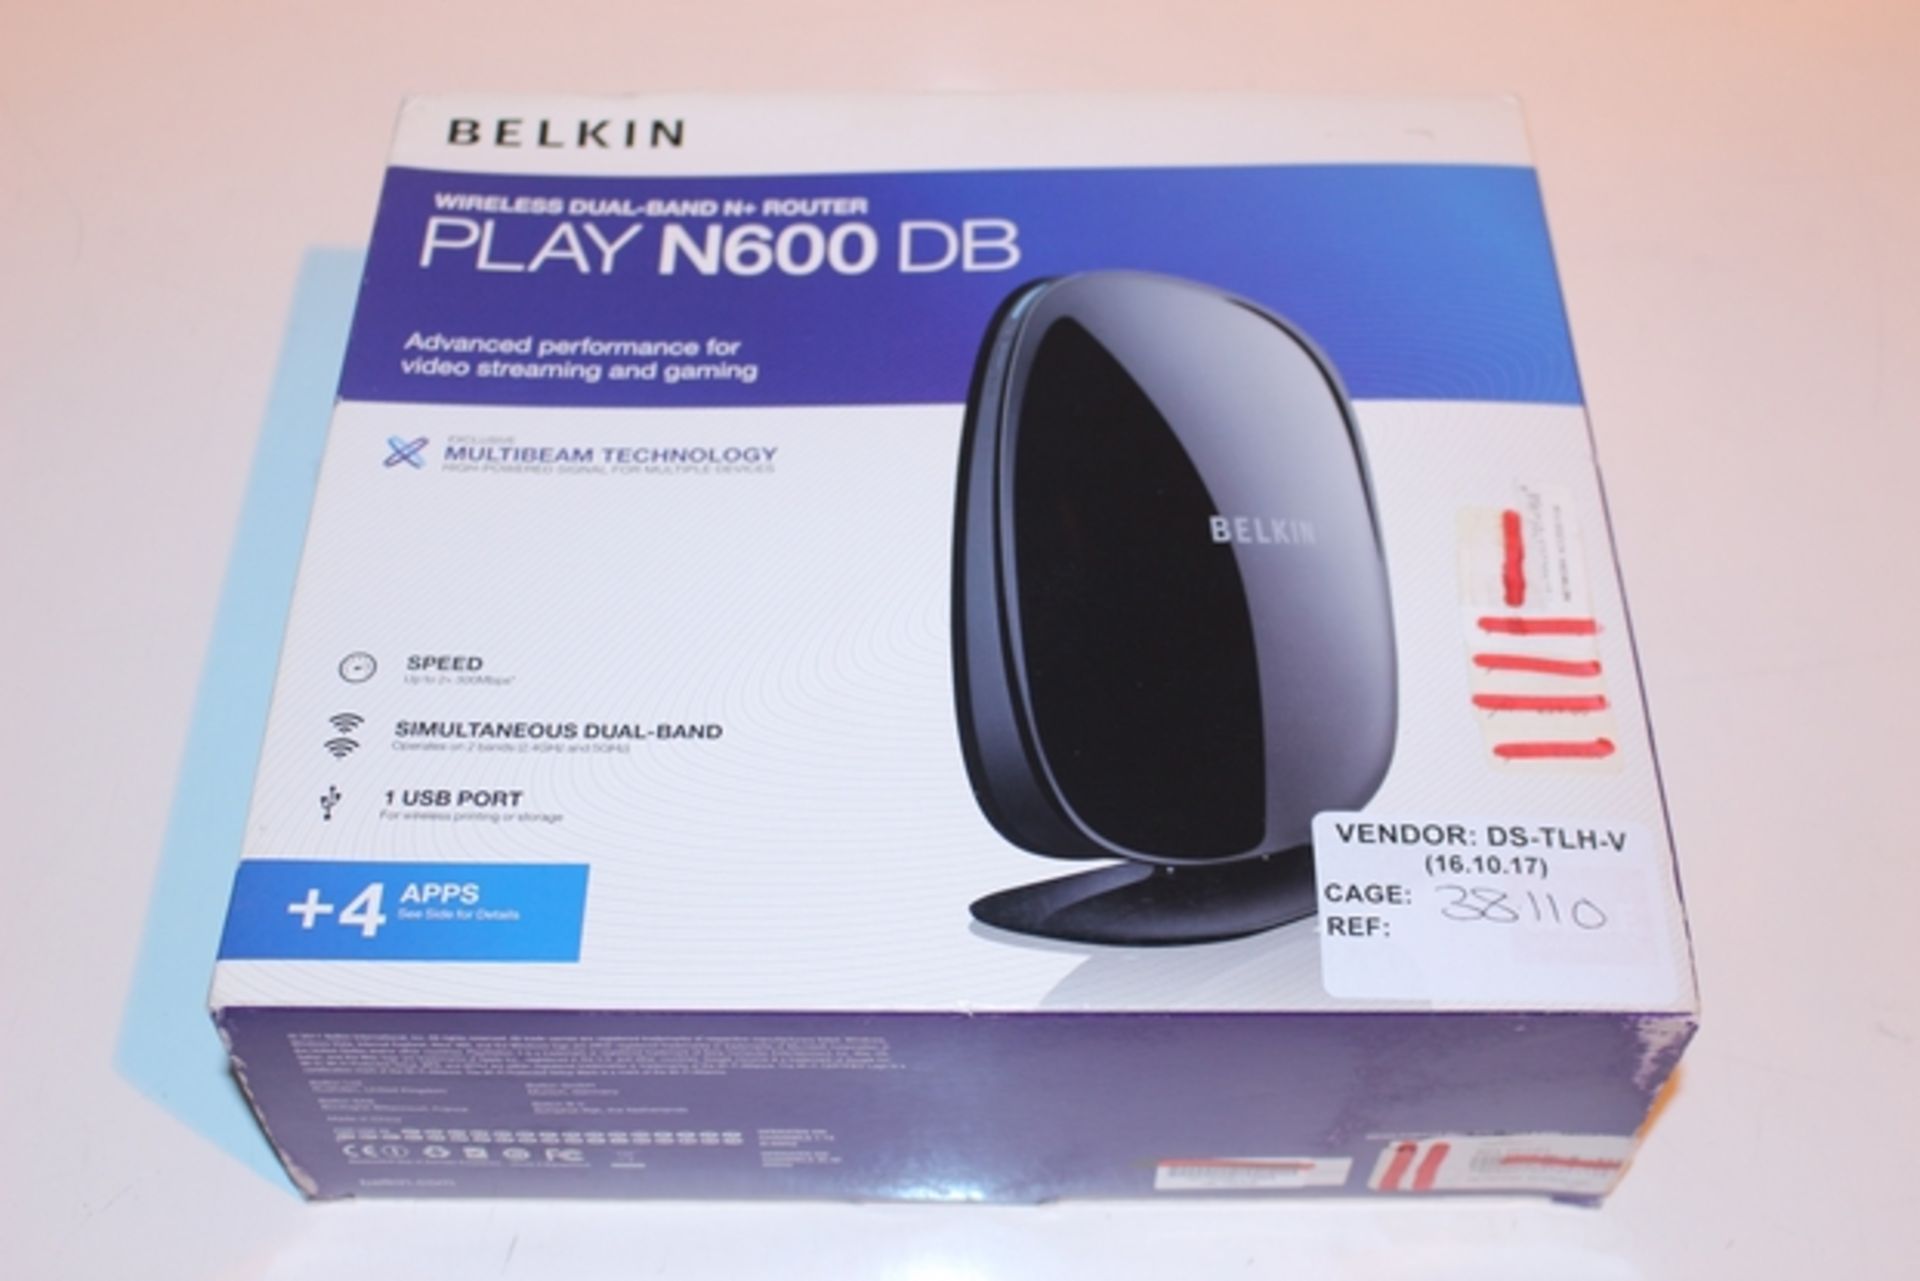 1X BOXED BELKIN WIRELESS DUAL BAND N PLUS ROUTER N600DB RRP £60 (DS-TLH-V) (38.110)